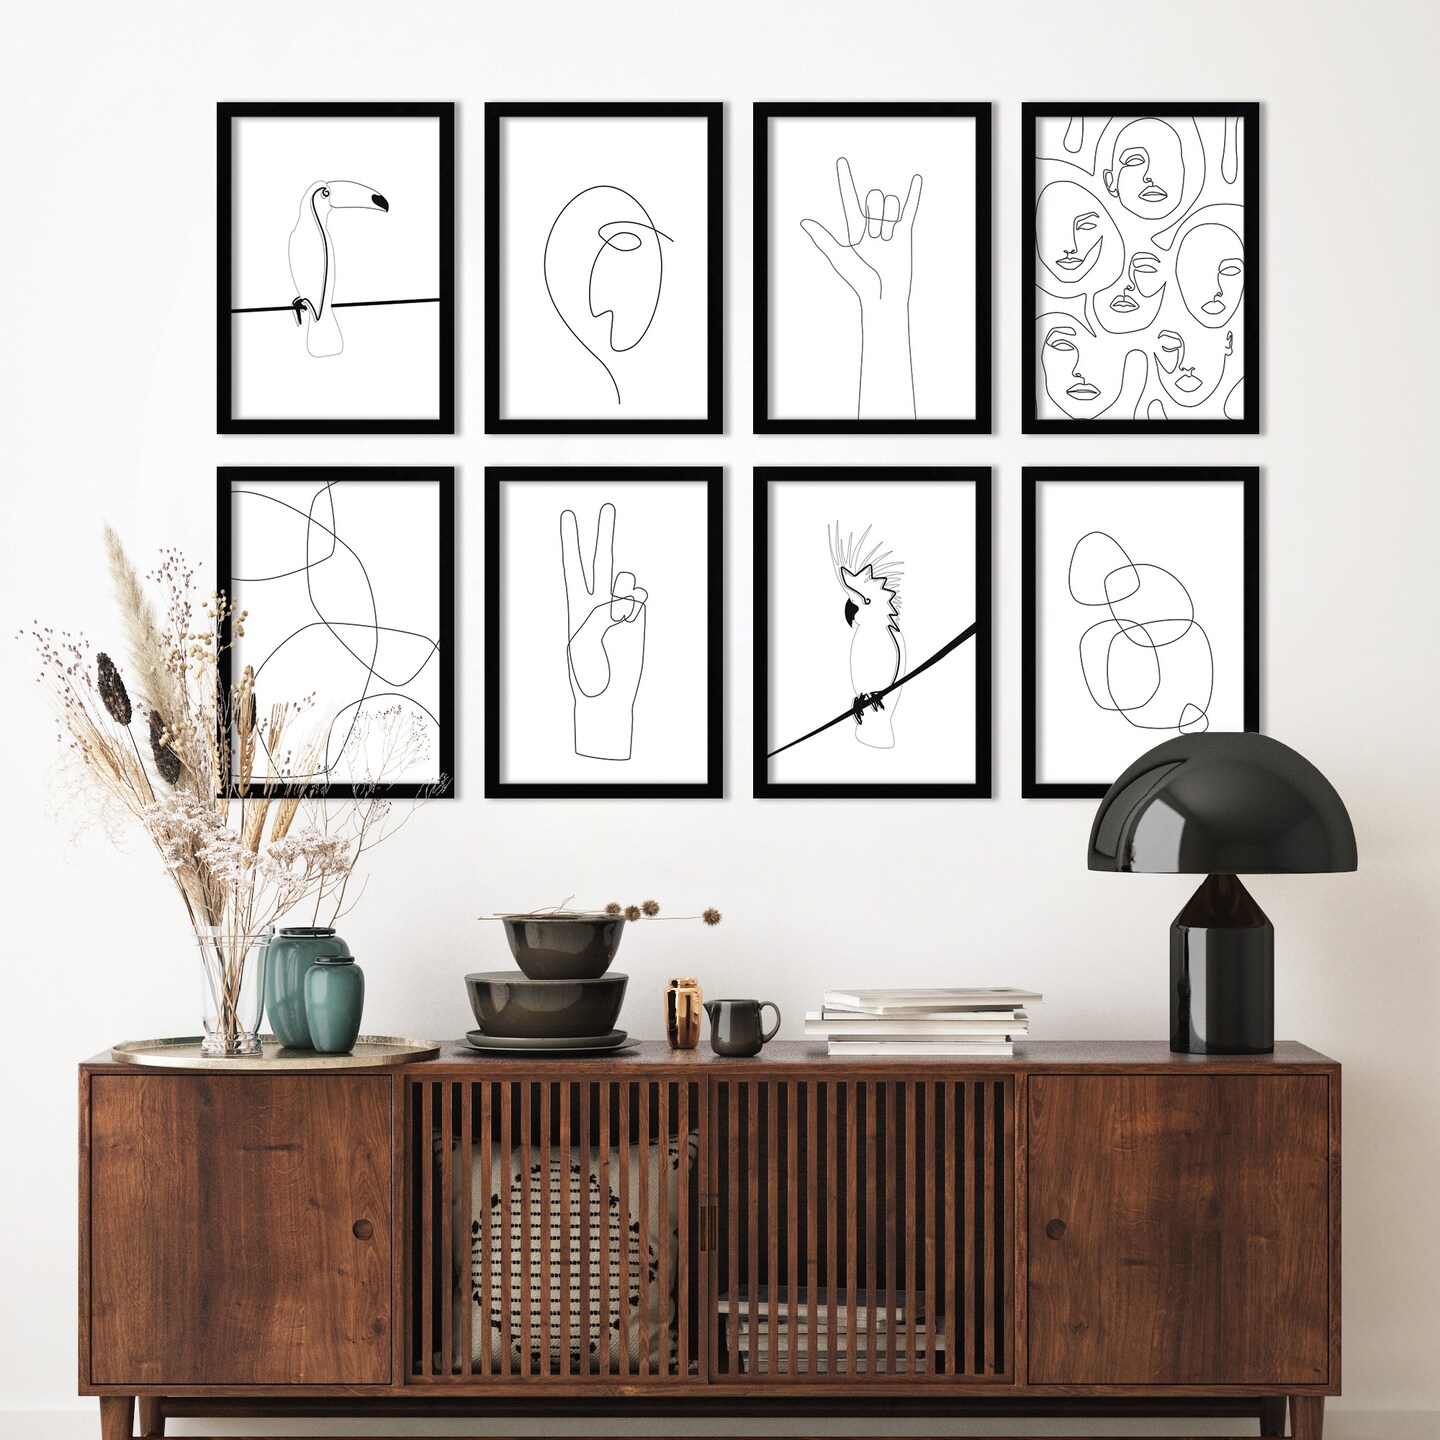 Linear Line Drawings by Explicit Design - 8 Piece Framed Art Set